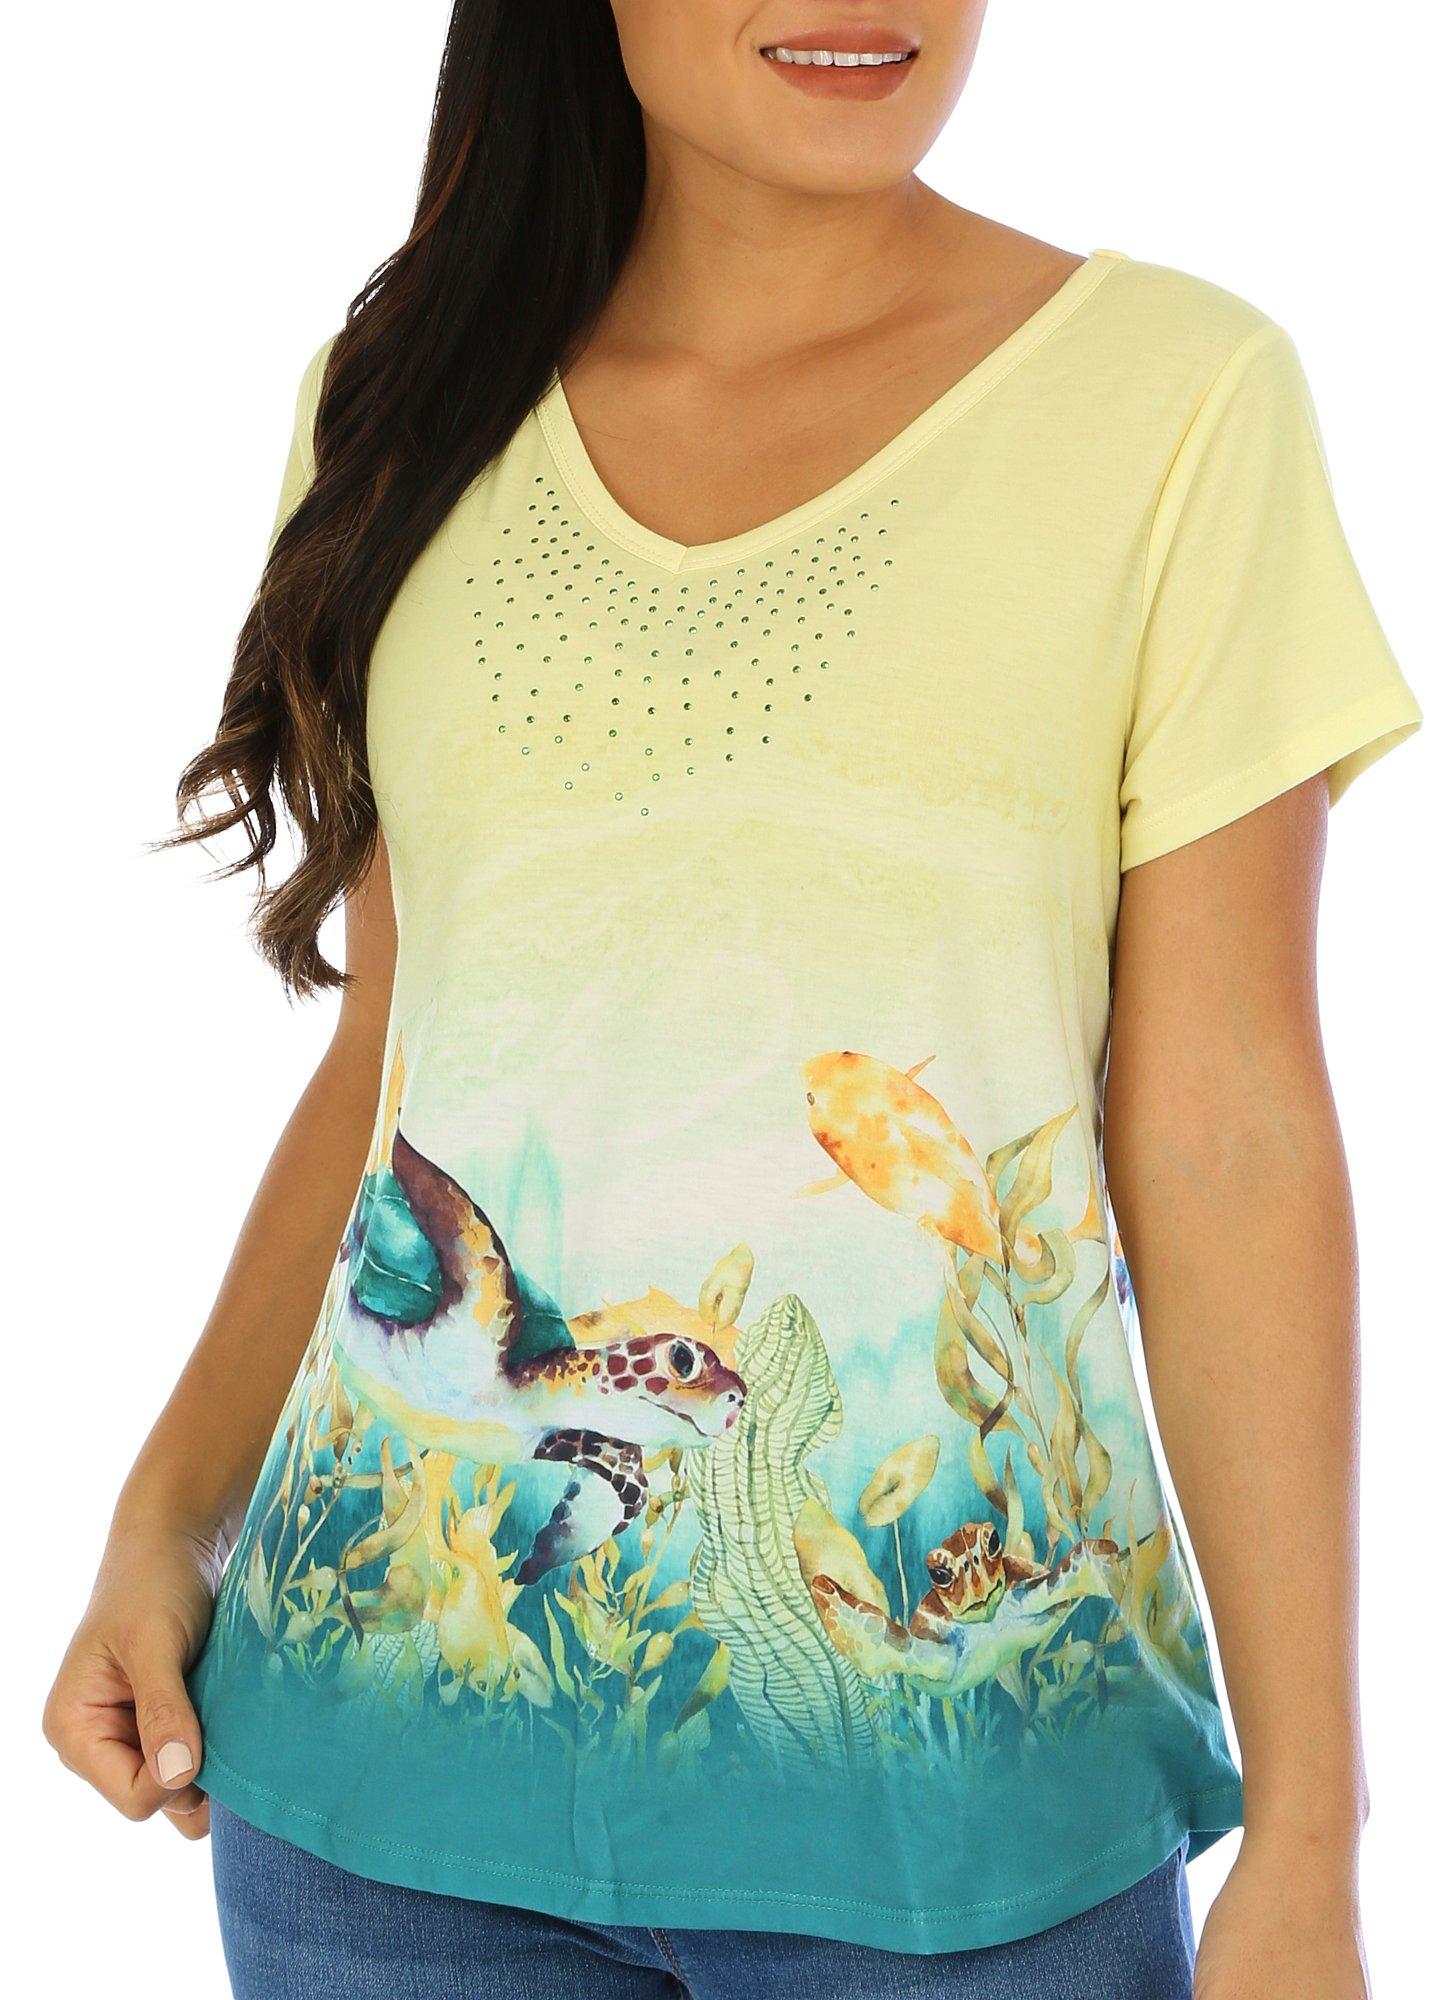 Coral Bay Womens Turtle Print V-Neck Short Sleeve Top